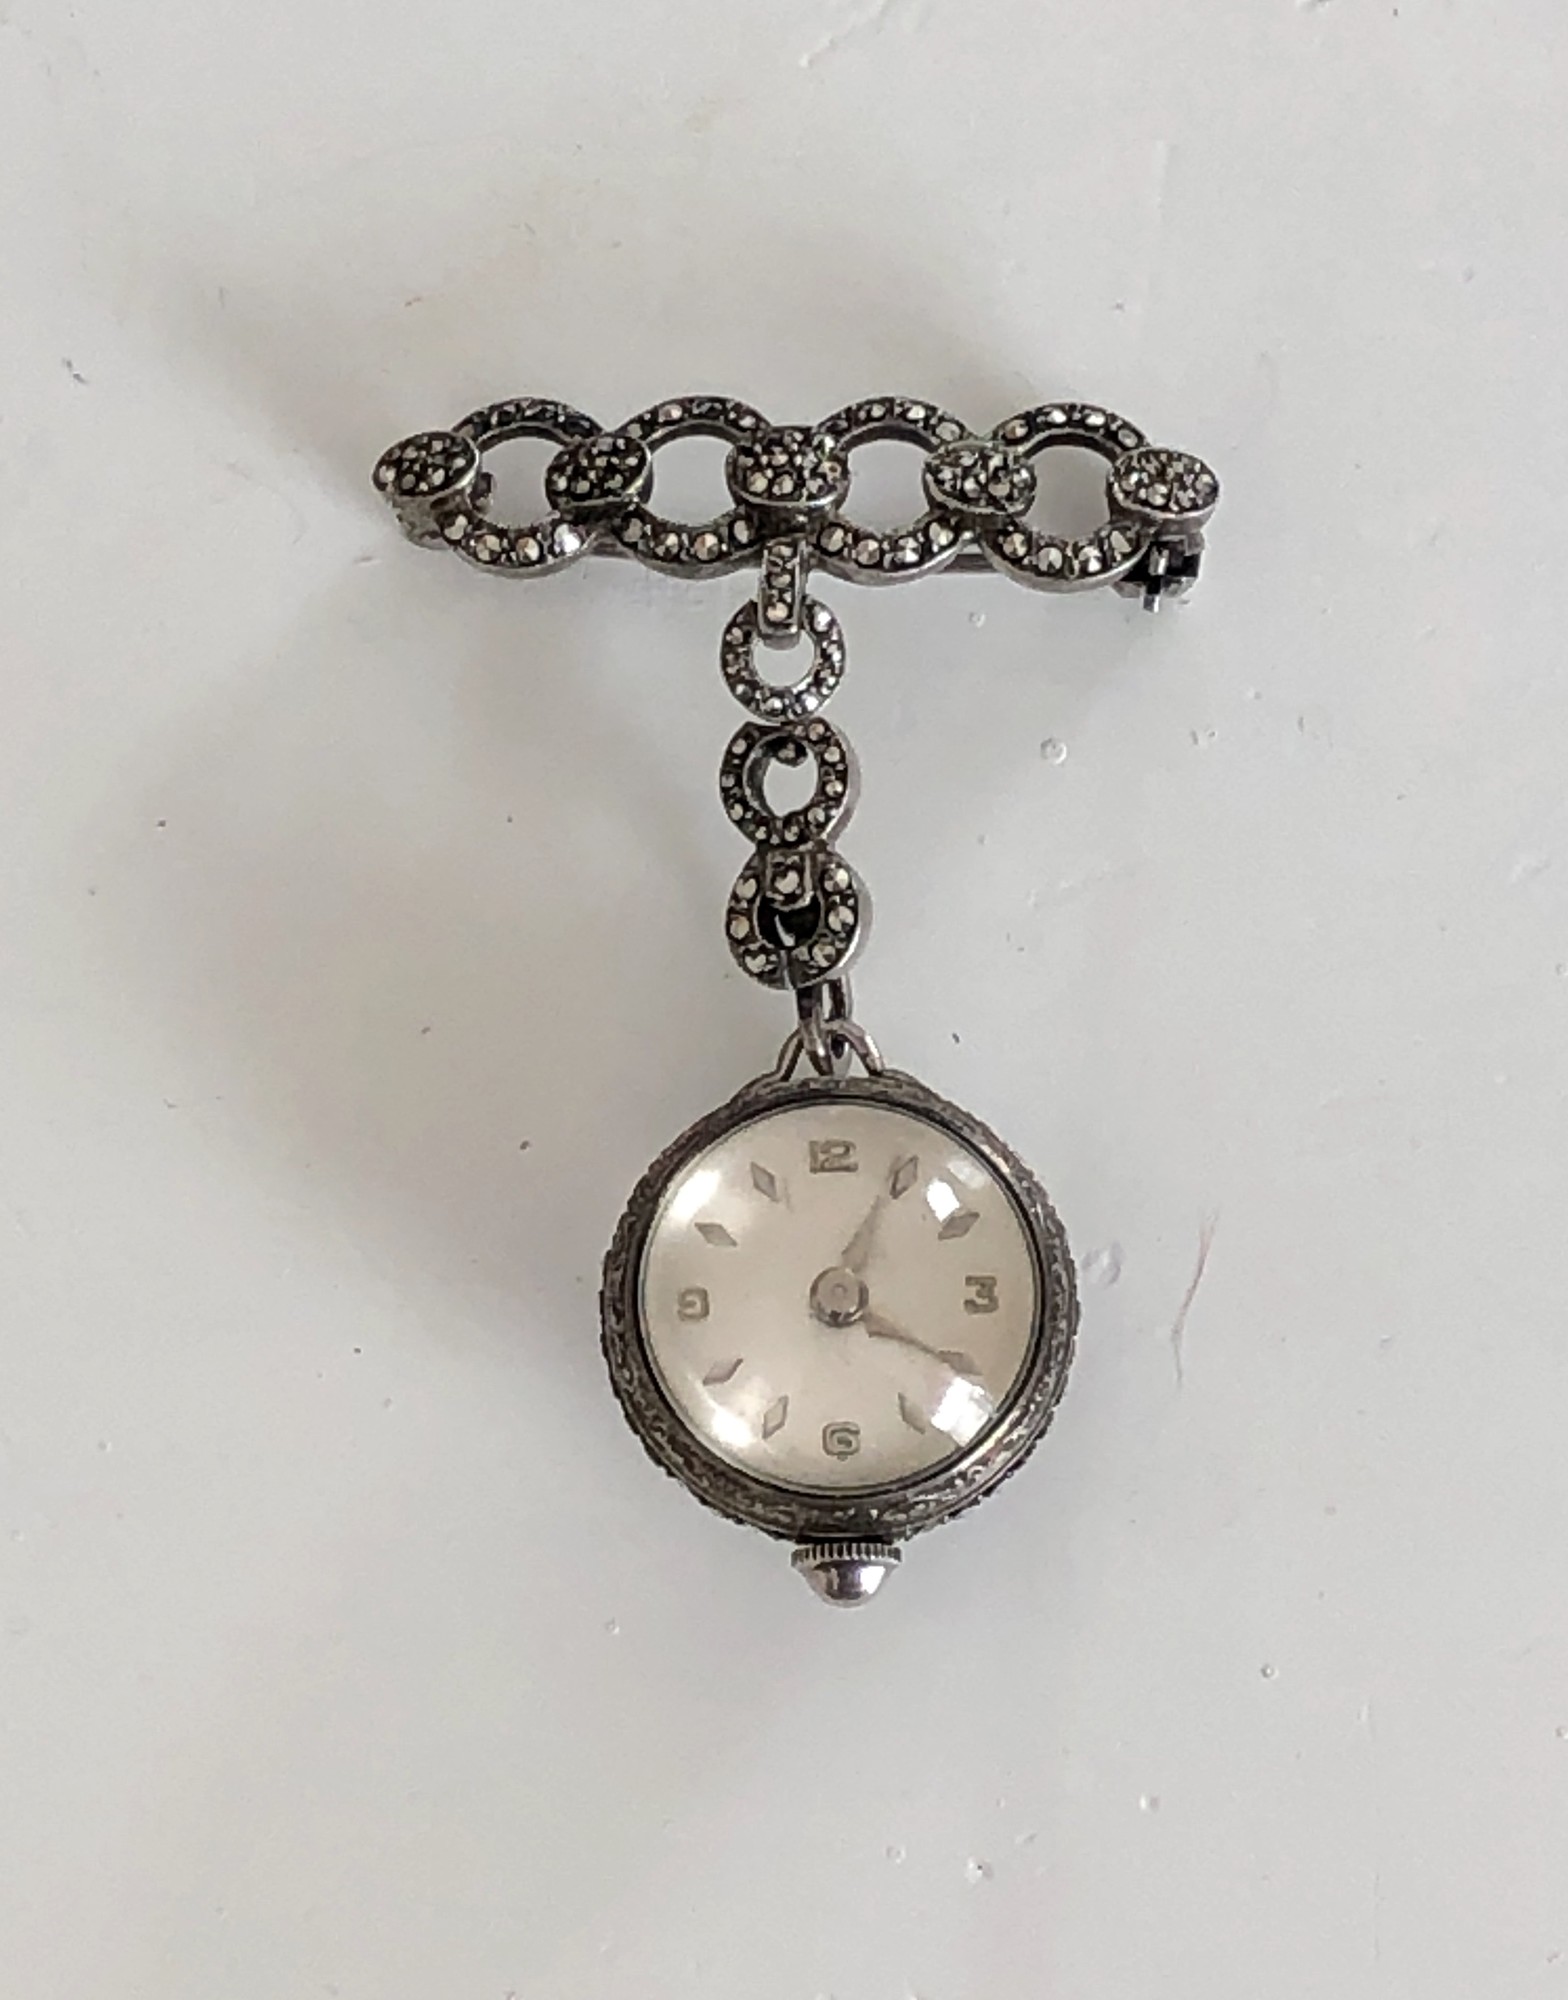 This amazing  watch has a beautiful brooch with secure pin closure and suspends an articulated swinging marcasite encrusted section to hold the ball watch. The watch itself is encircled with bands of shining marcasite. The cream dial has silver markers for the minutes and is marked for Bucherer, 17 Jewel, 800 silver.

The condition of this piece is excellent  and the watch is currently working. This is a timeless and elegant timepiece.